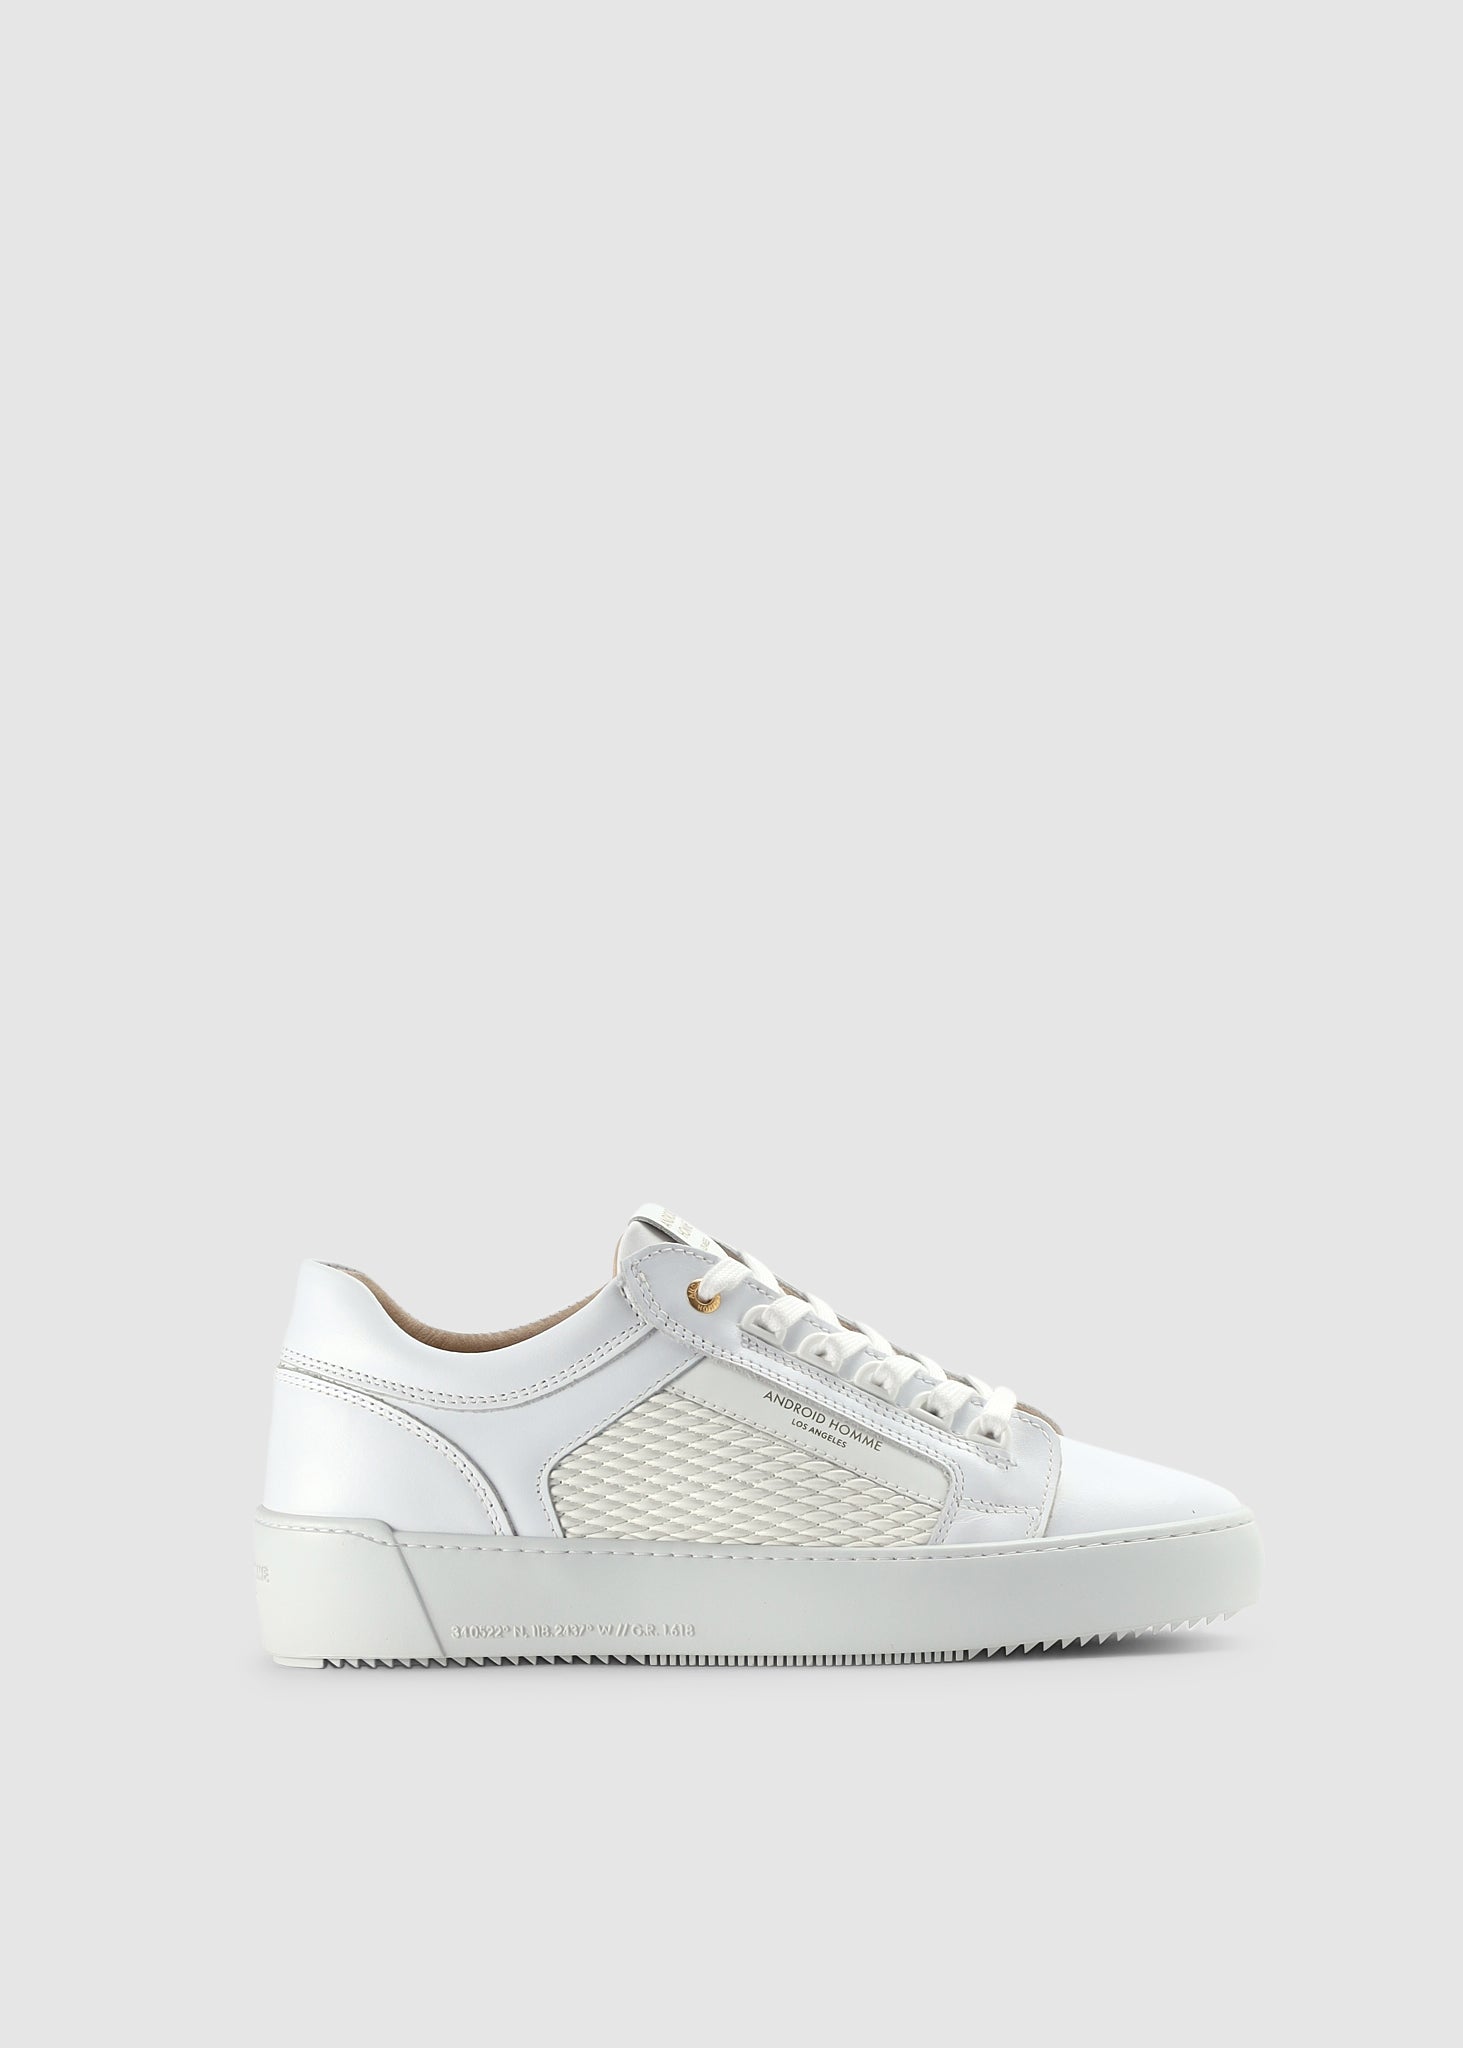 Android Homme Mens Venice Stretch Woven Trainers In White - White